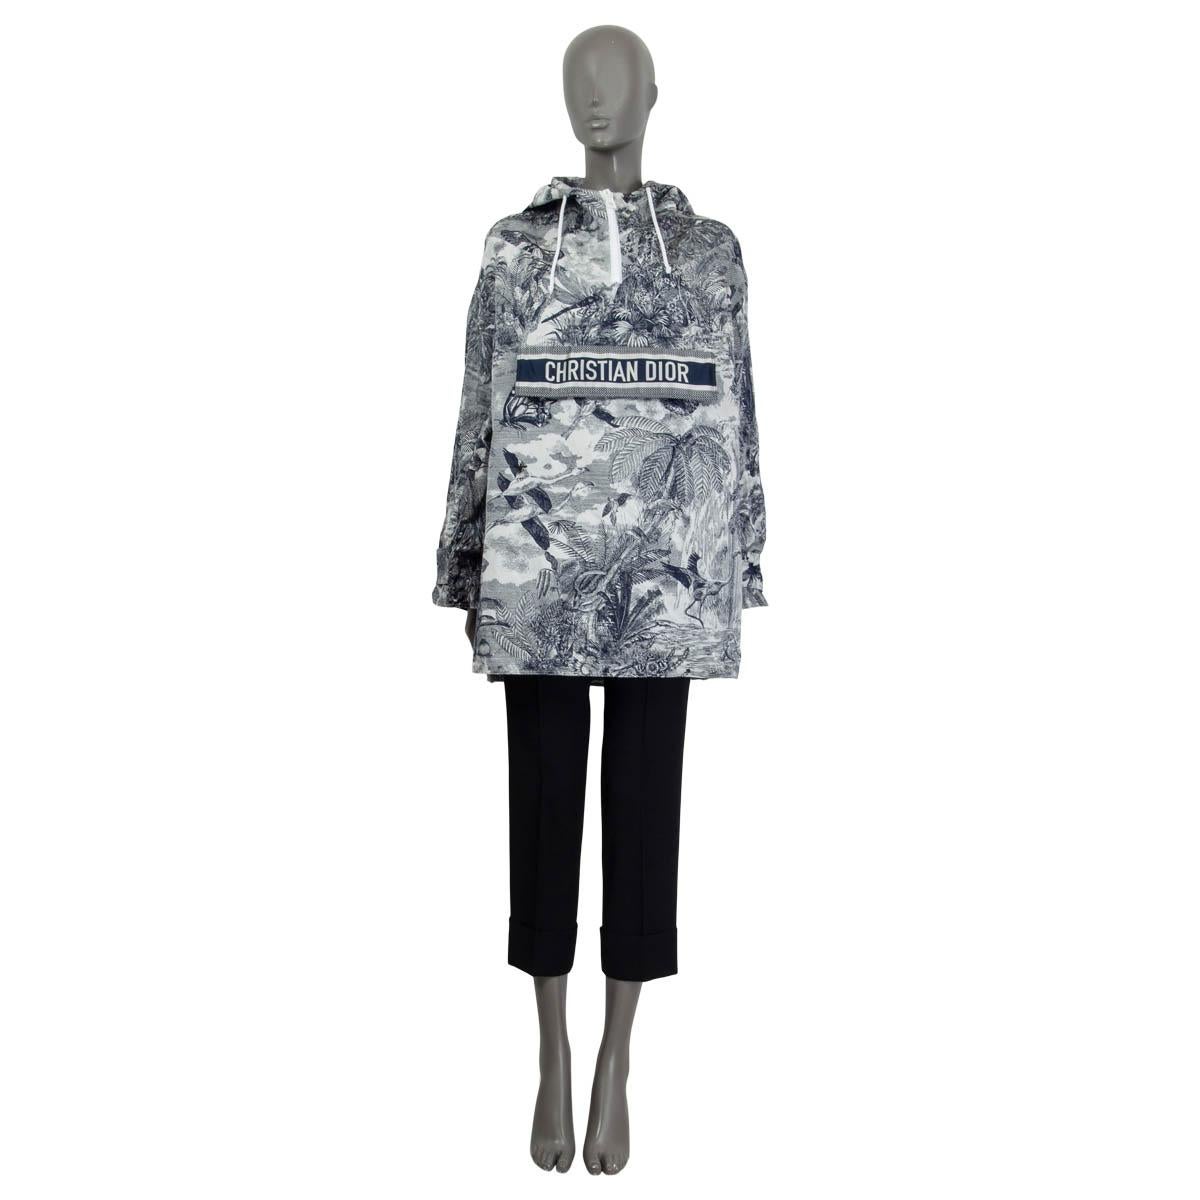 100% authentic Christian Dior hooded windbreaker jacket in off-white and navy blue Toile de Jouy Tropicalia printed technical taffeta (100% polyester). Features epaulettes at the cuffs and a 'Christian Dior' flap pocket on the front. Opens with a